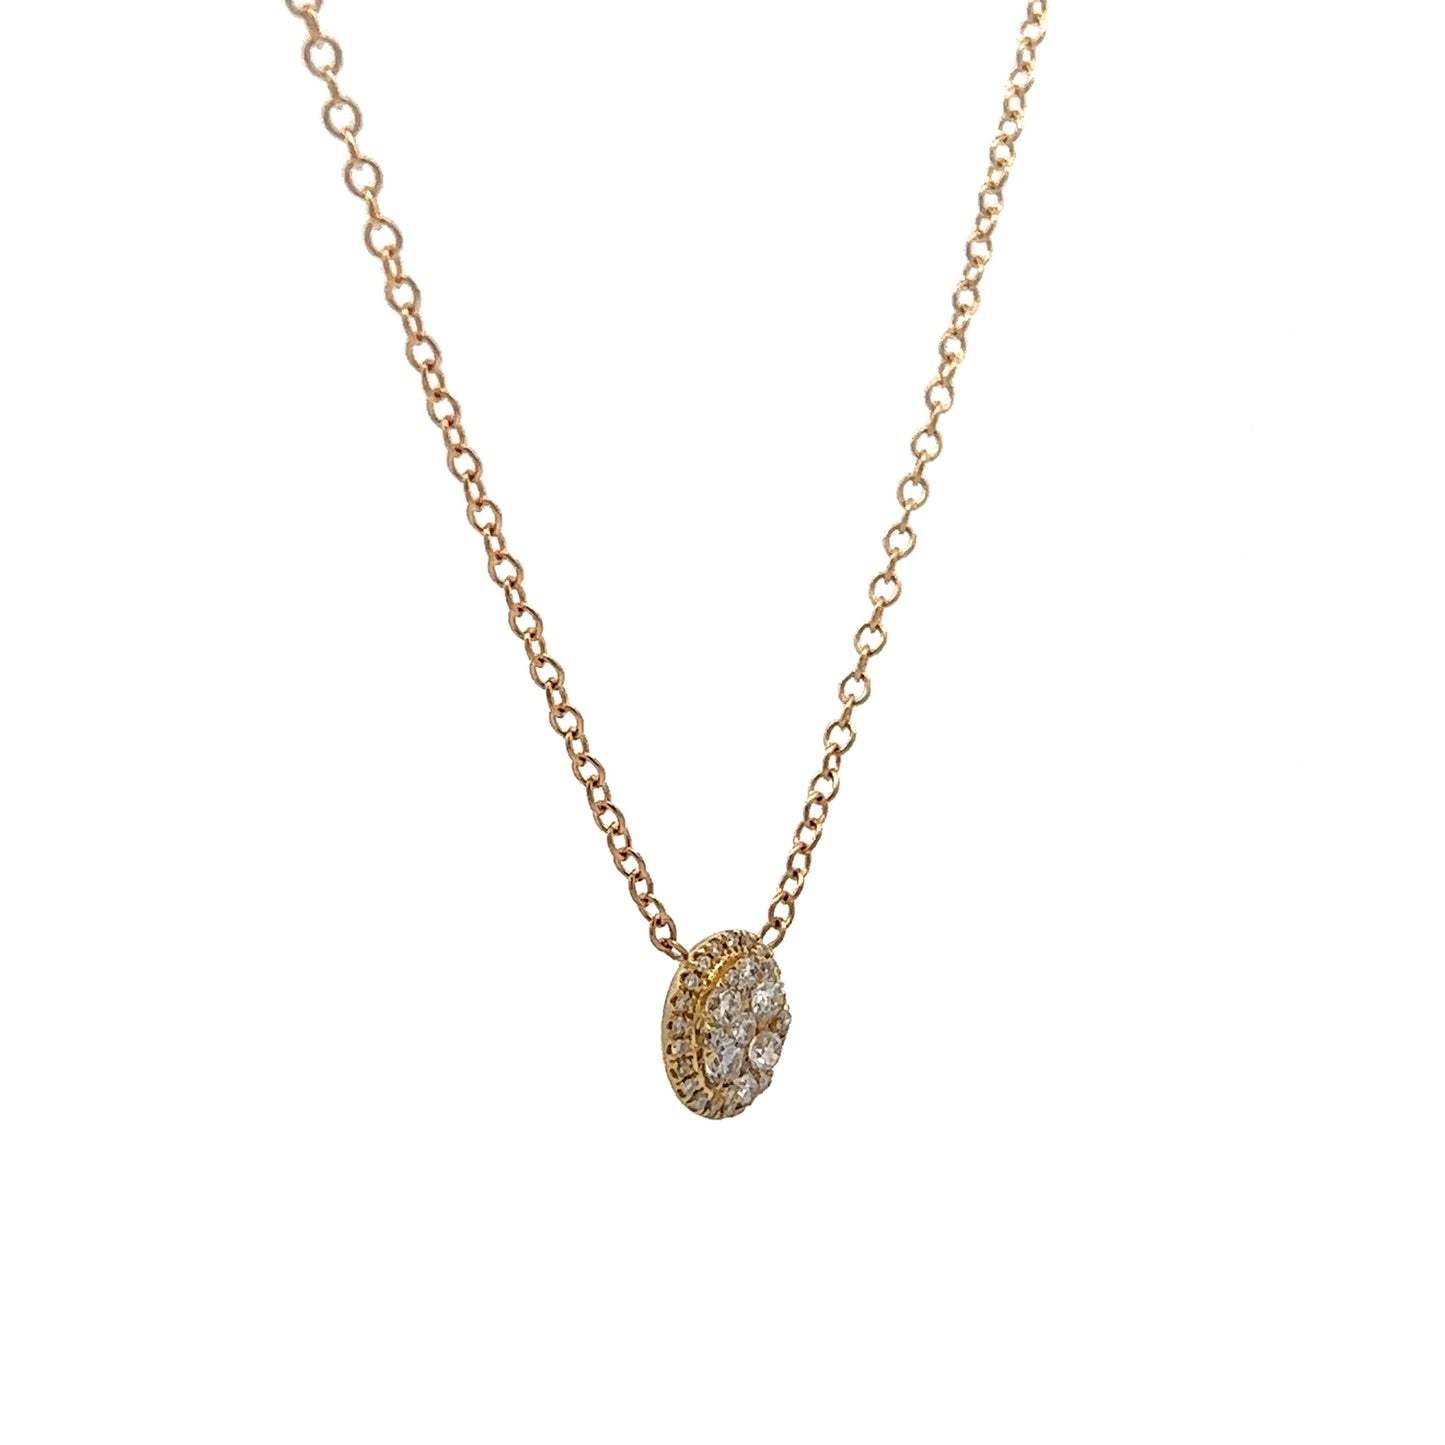 .23 Diamond Cluster Pendant Necklace in Yellow Gold